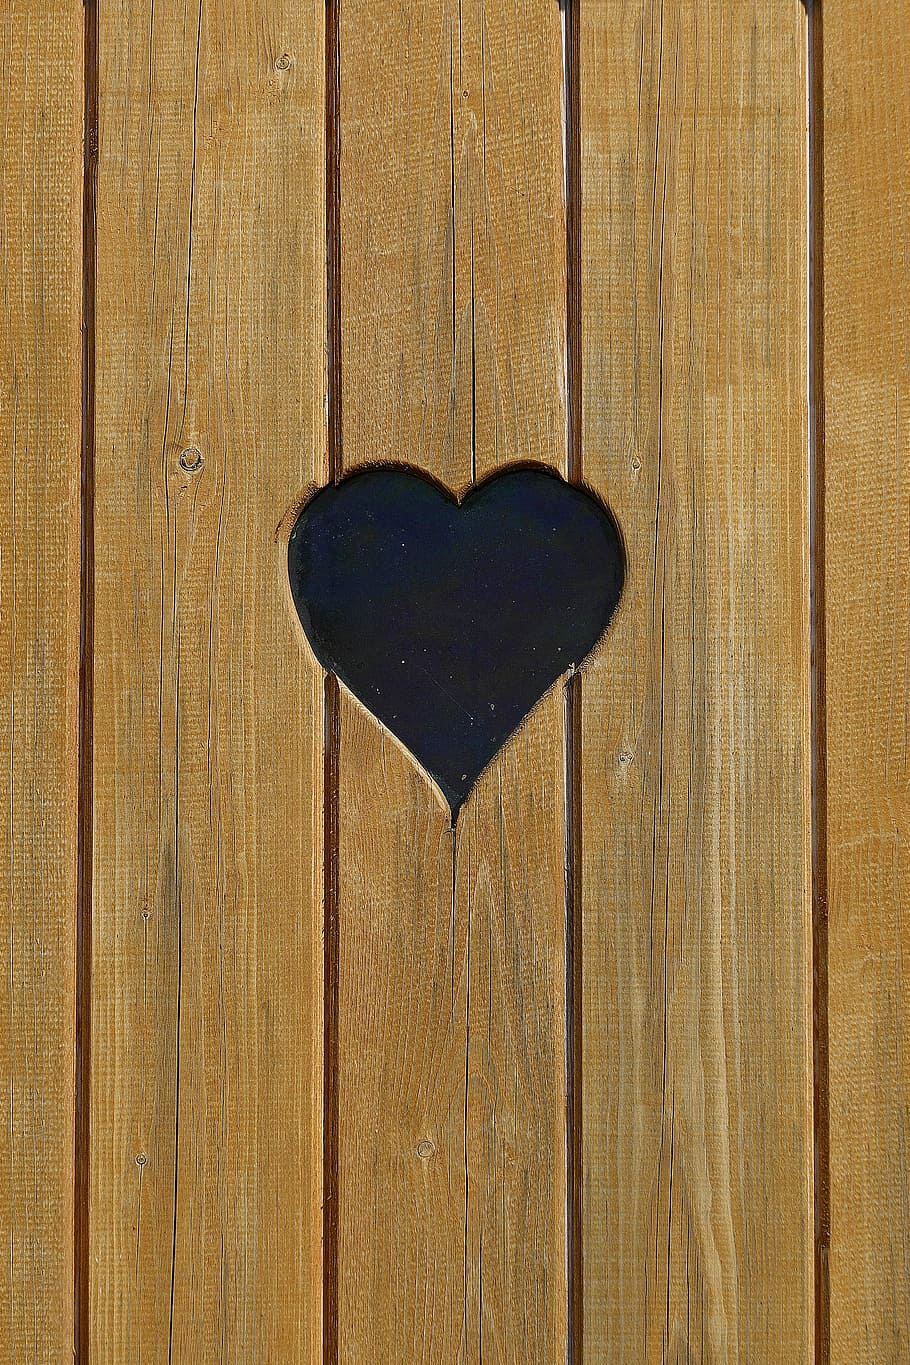 heart, loo, wood, woods, boards, background, close, farm, wc, outhouse